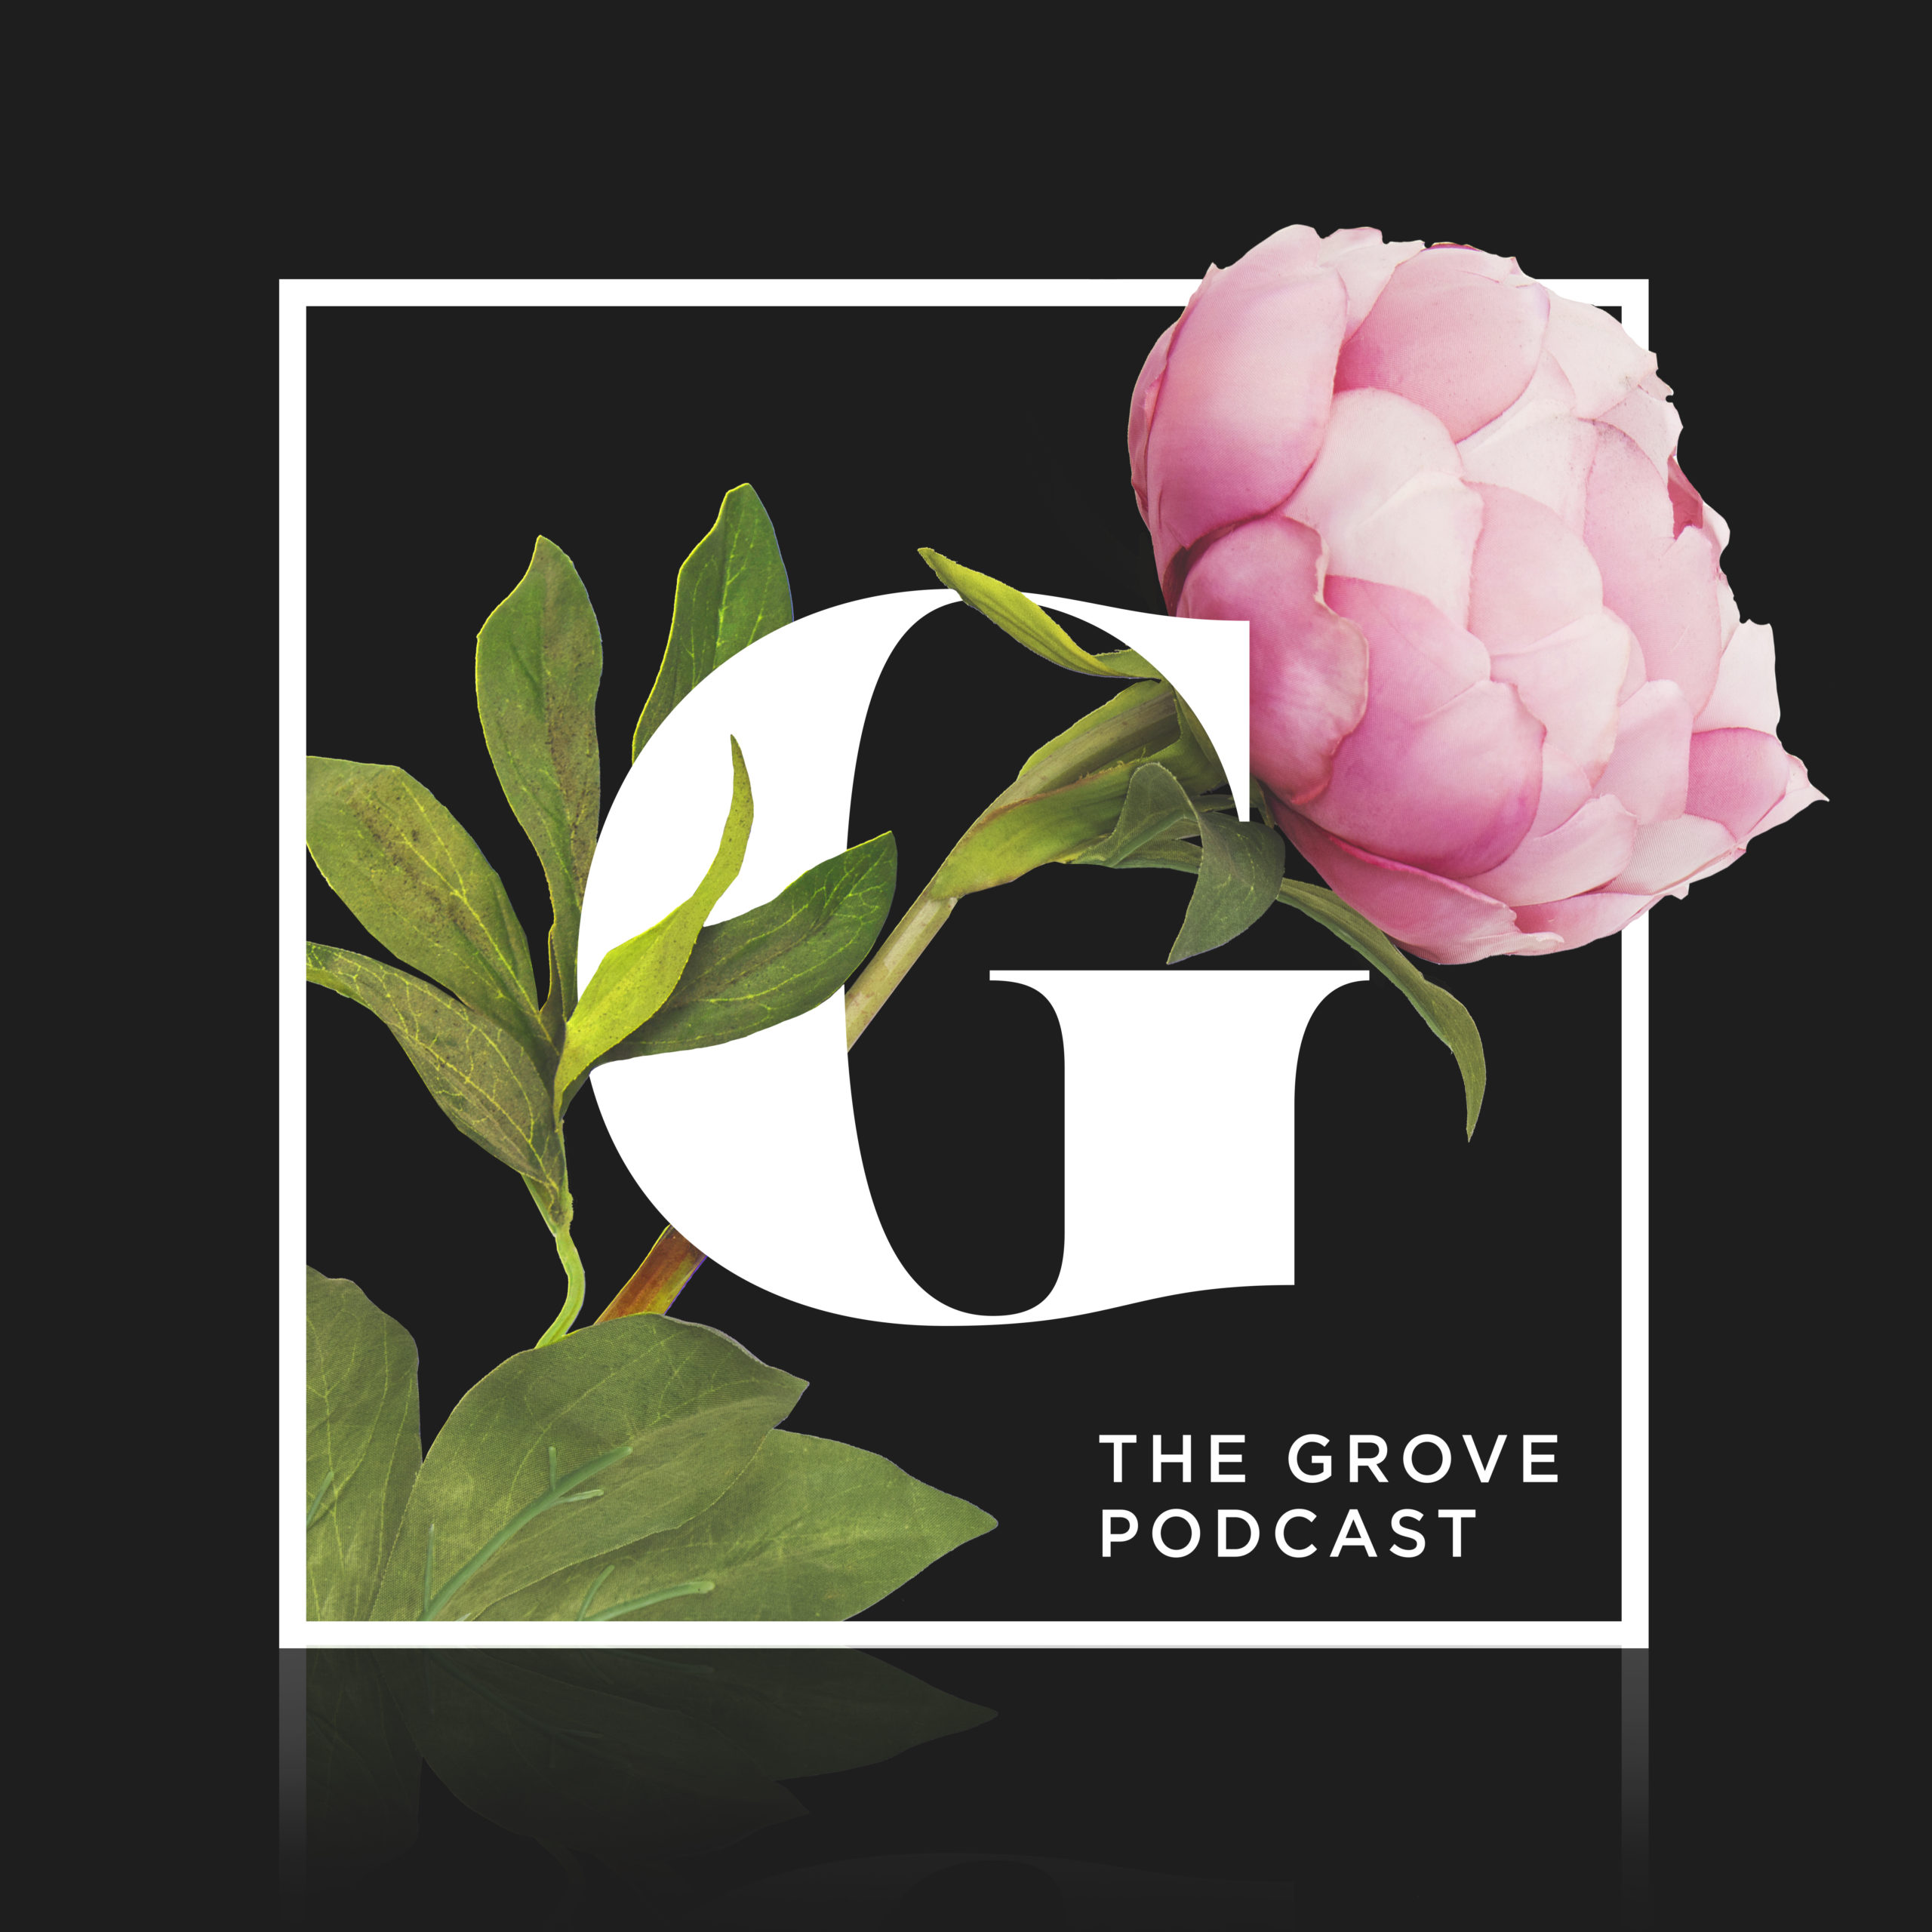 The Grove Podcast